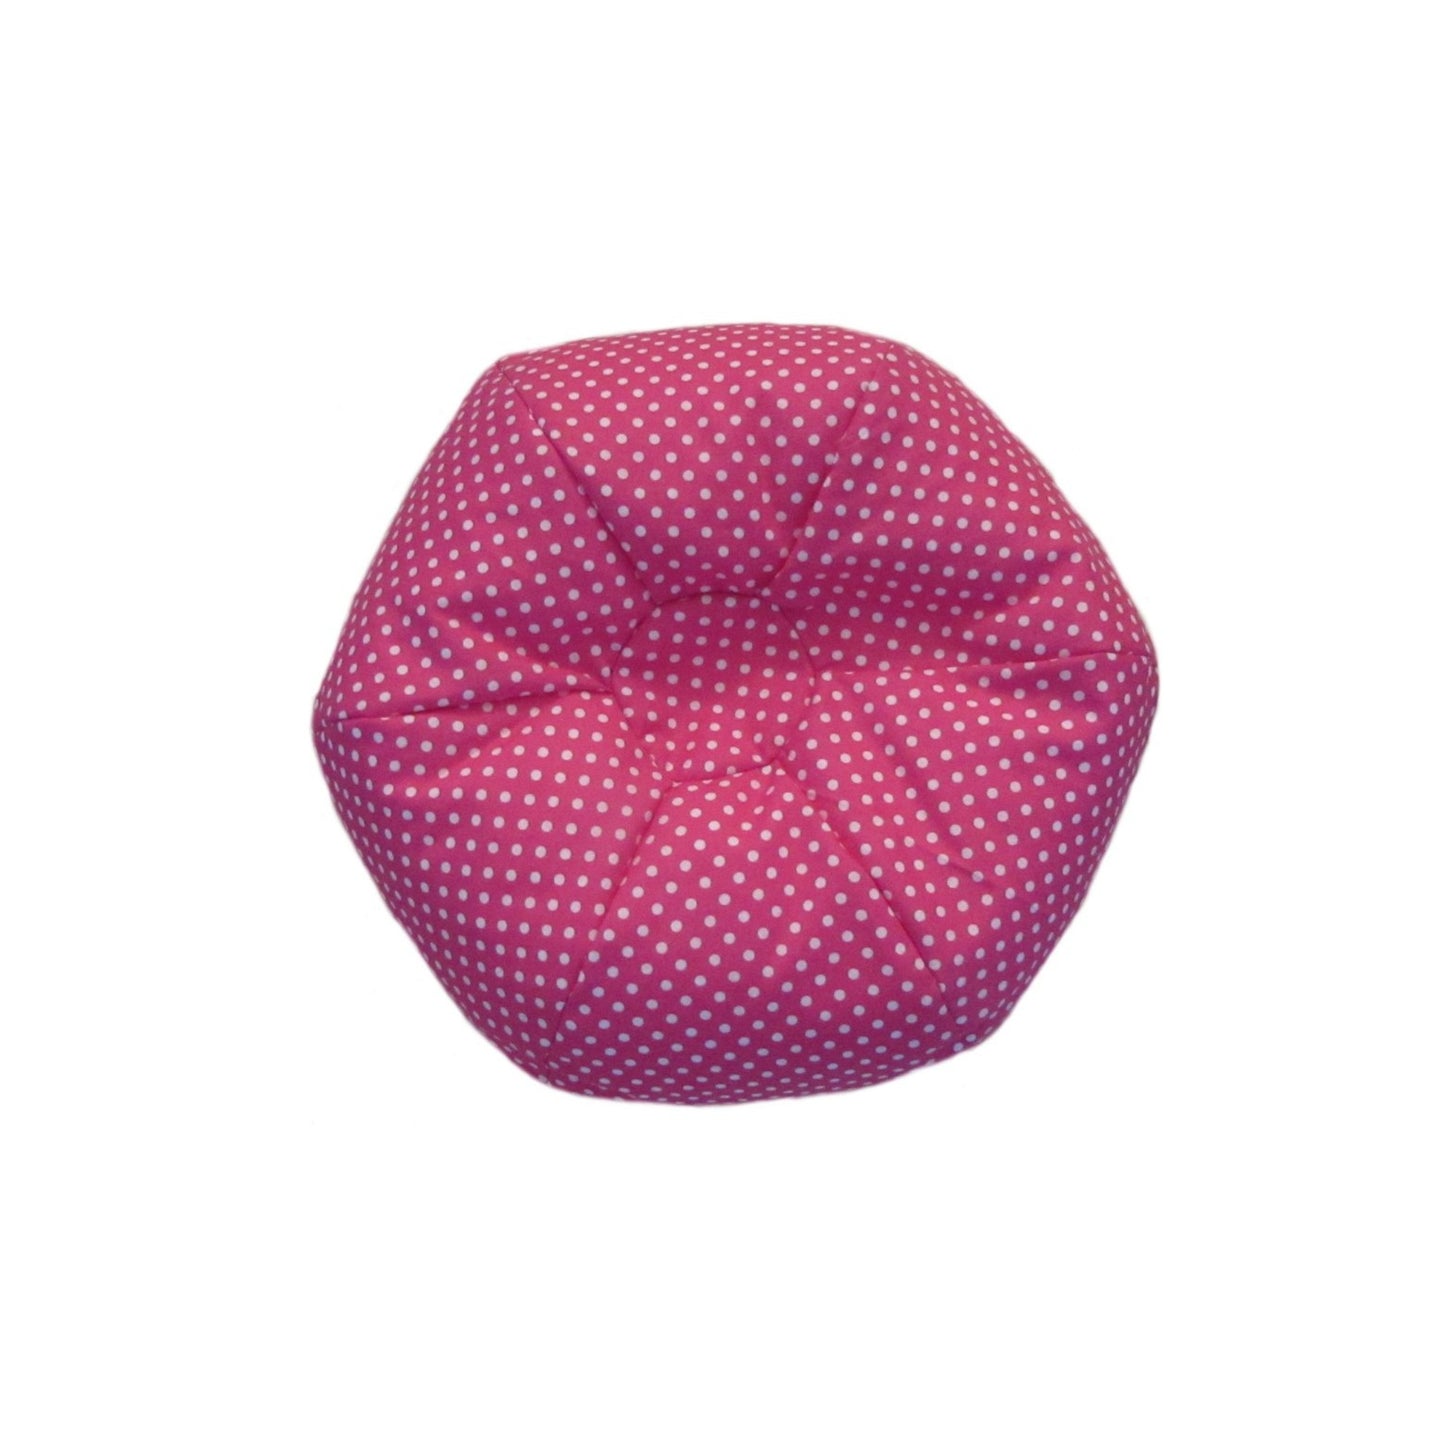 Pink Dots Doll Bean Bag Chair for 18-inch dolls without doll